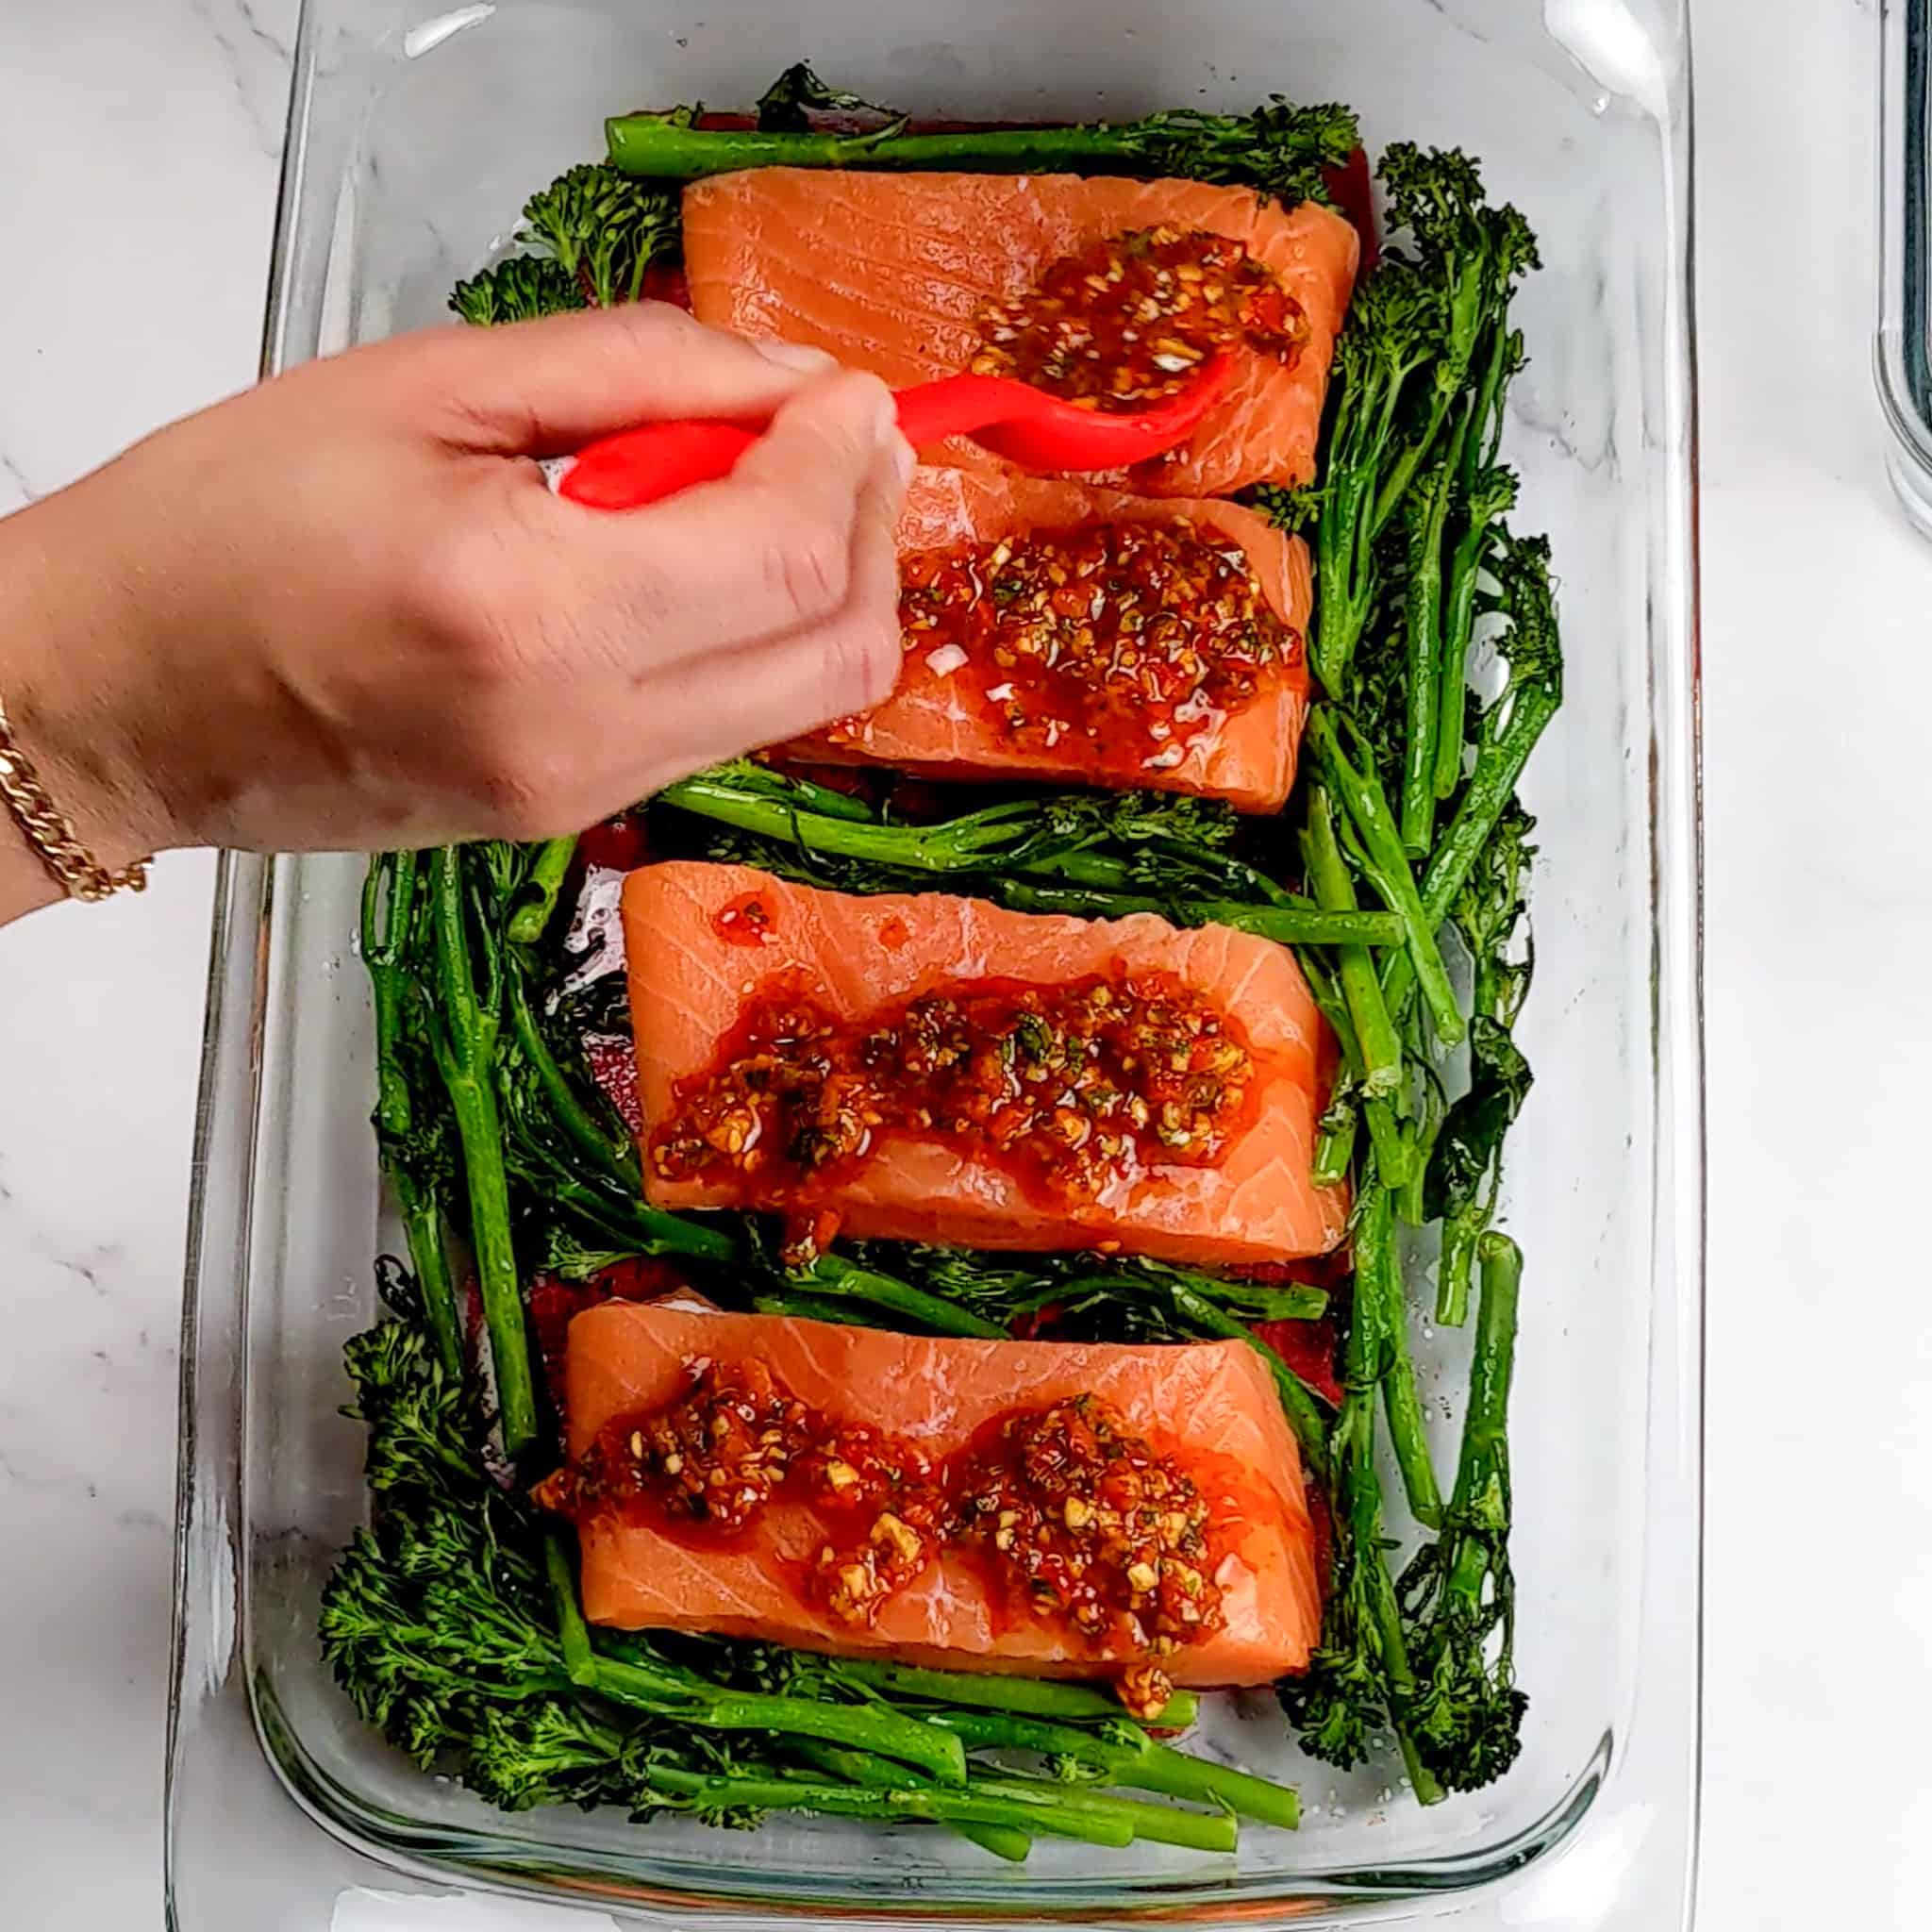 Calabrian pepper basil sauce being spooned onto the salmon fillets with a silicone spoon in a rectangle large glass baking dish filled with broccolini for the Calabrian Pepper Basil Baked Salmon and Broccolini recipe.